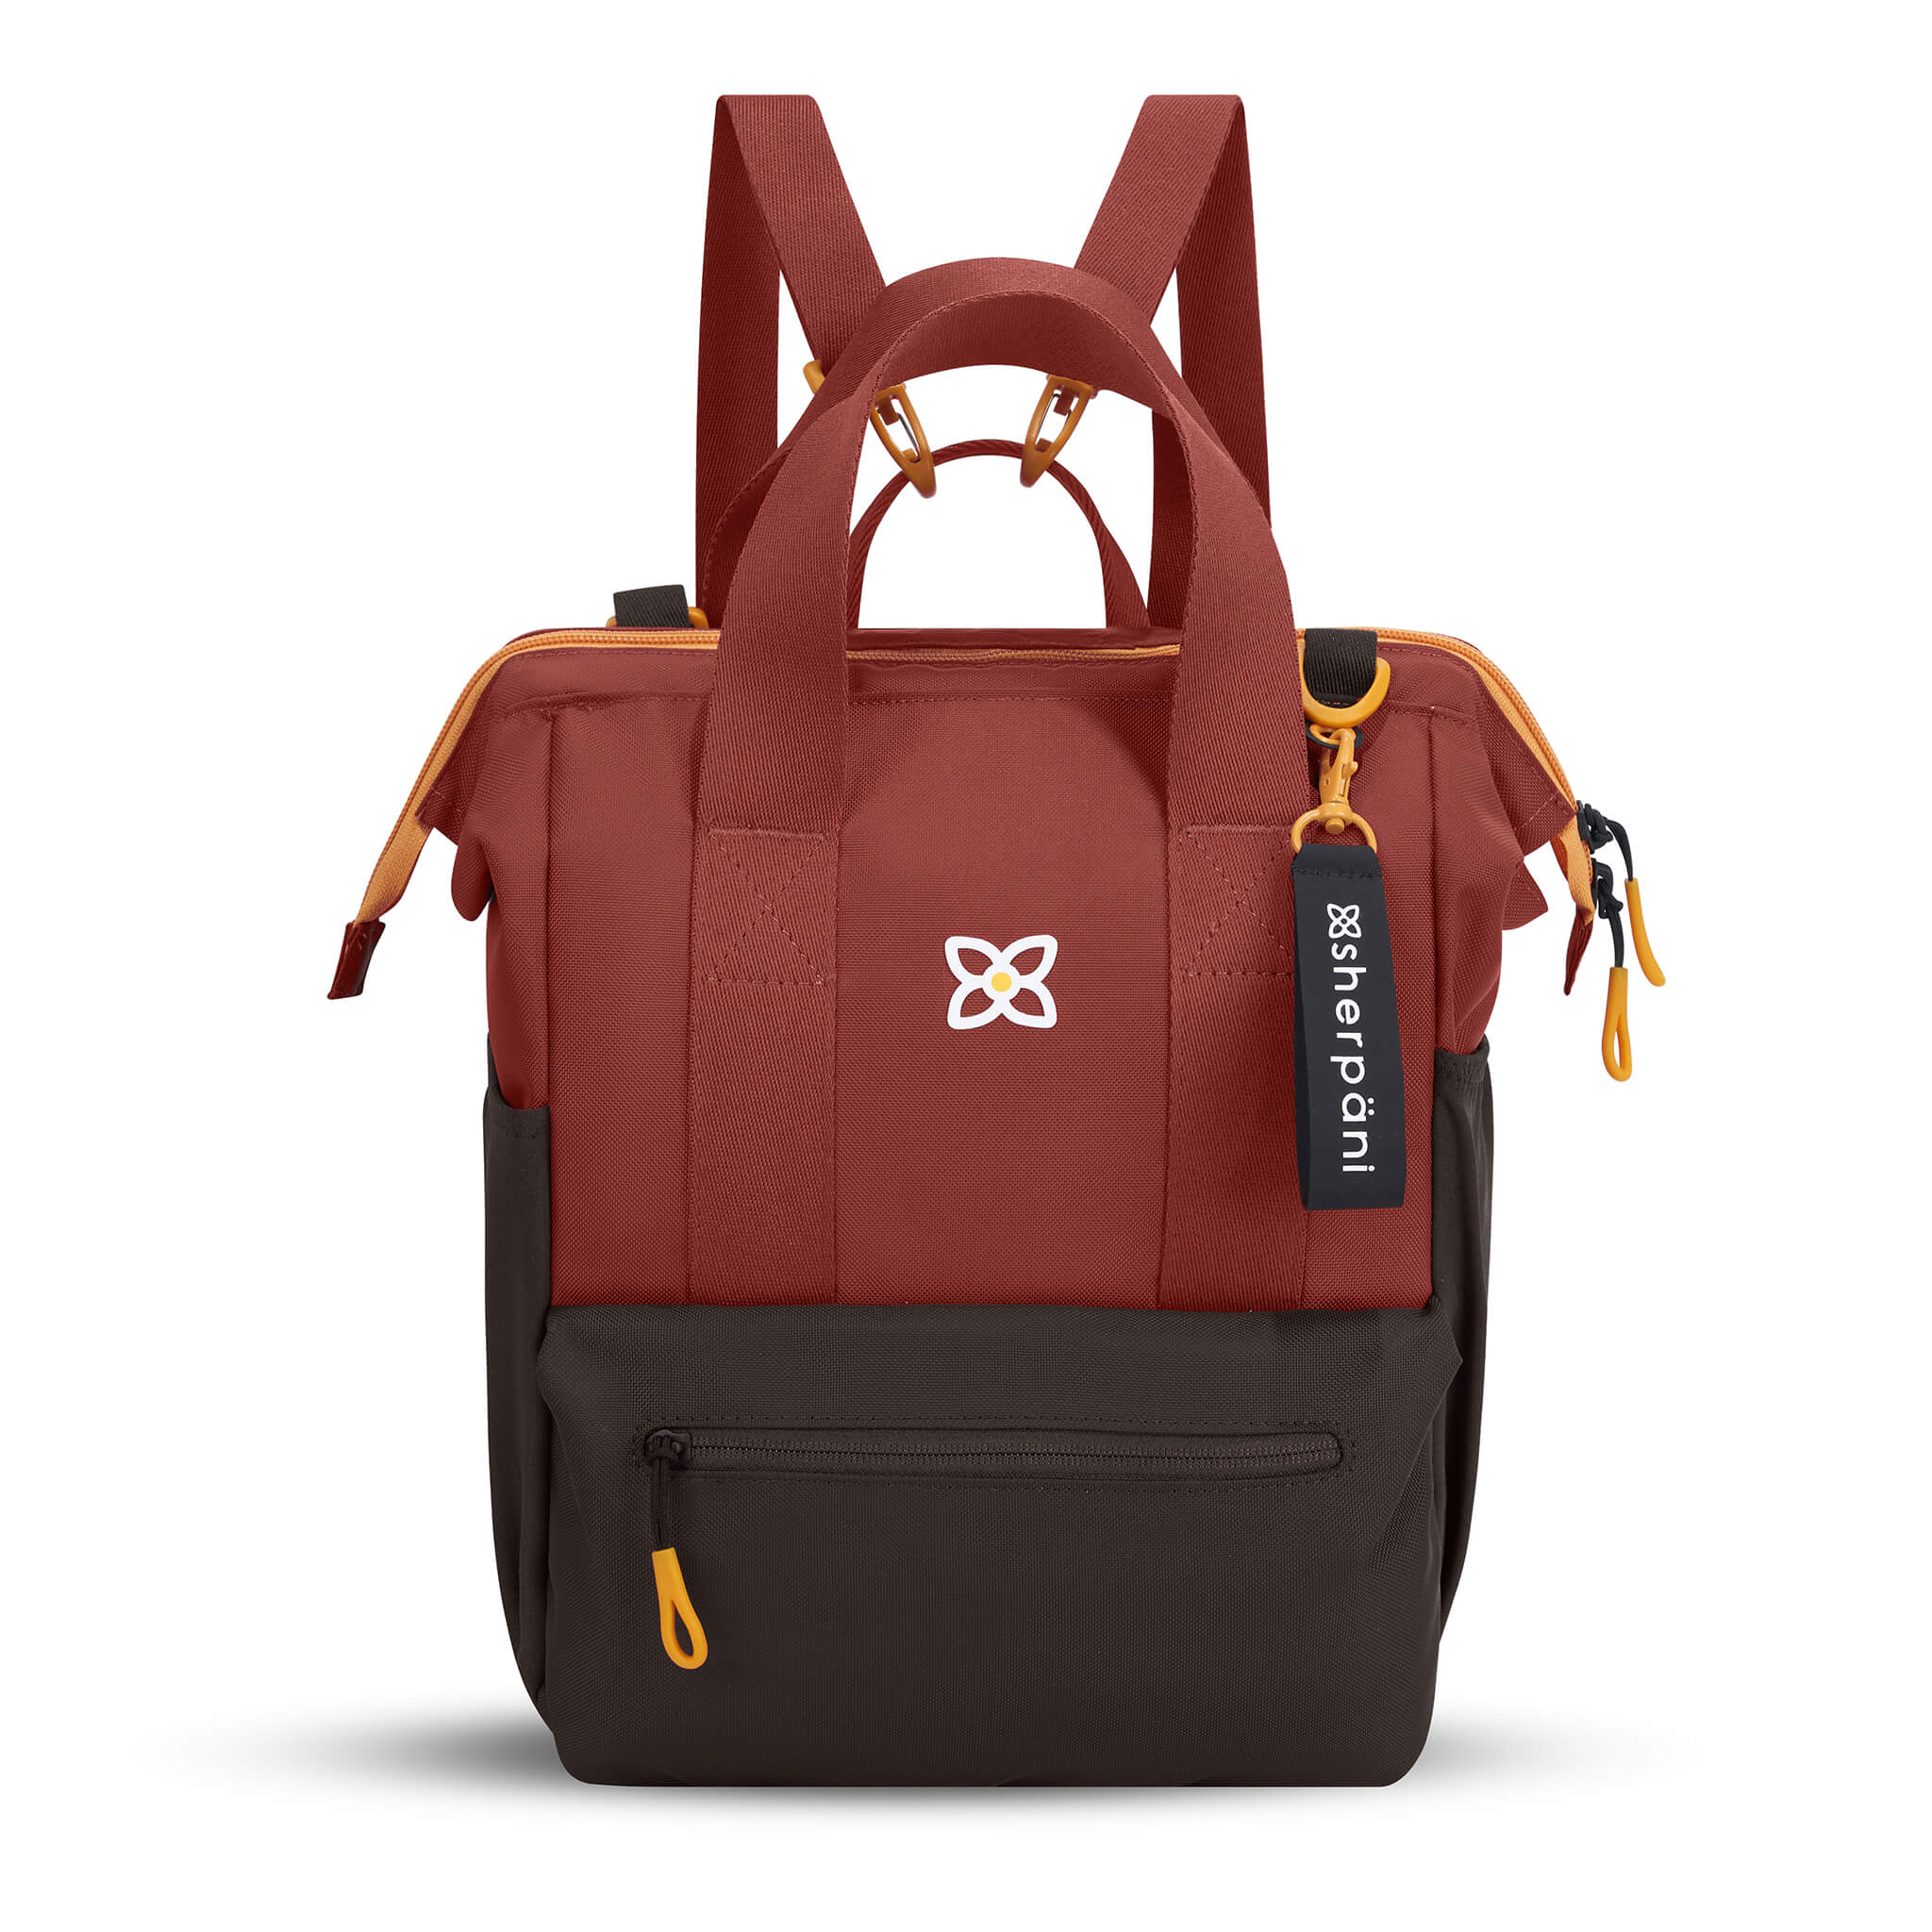 Flat front view of Sherpani convertible travel bag, the Dispatch in Cider. Dispatch features include external zipper pocket, three water bottle holders, fixed tote handles, removable straps, detachable straps, adjustable straps, padded laptop sleeve and a doctor bag opening. The Cider color is two-toned in burgundy and dark brown with accents in yellow. 